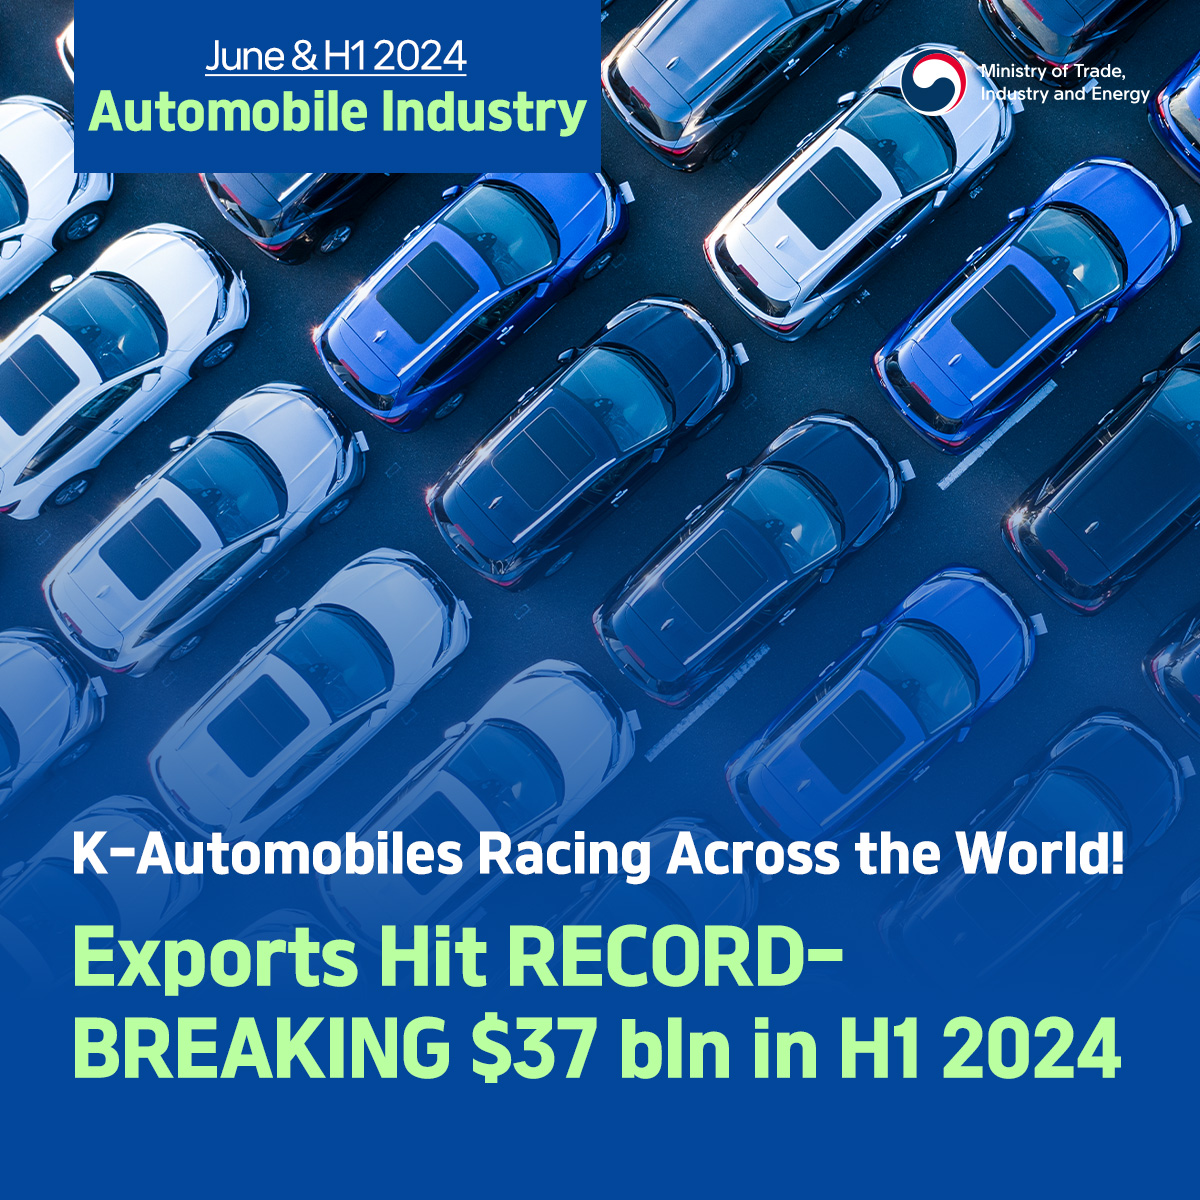 K-automobiles racing across the world with historic $37 bln H1 exports!